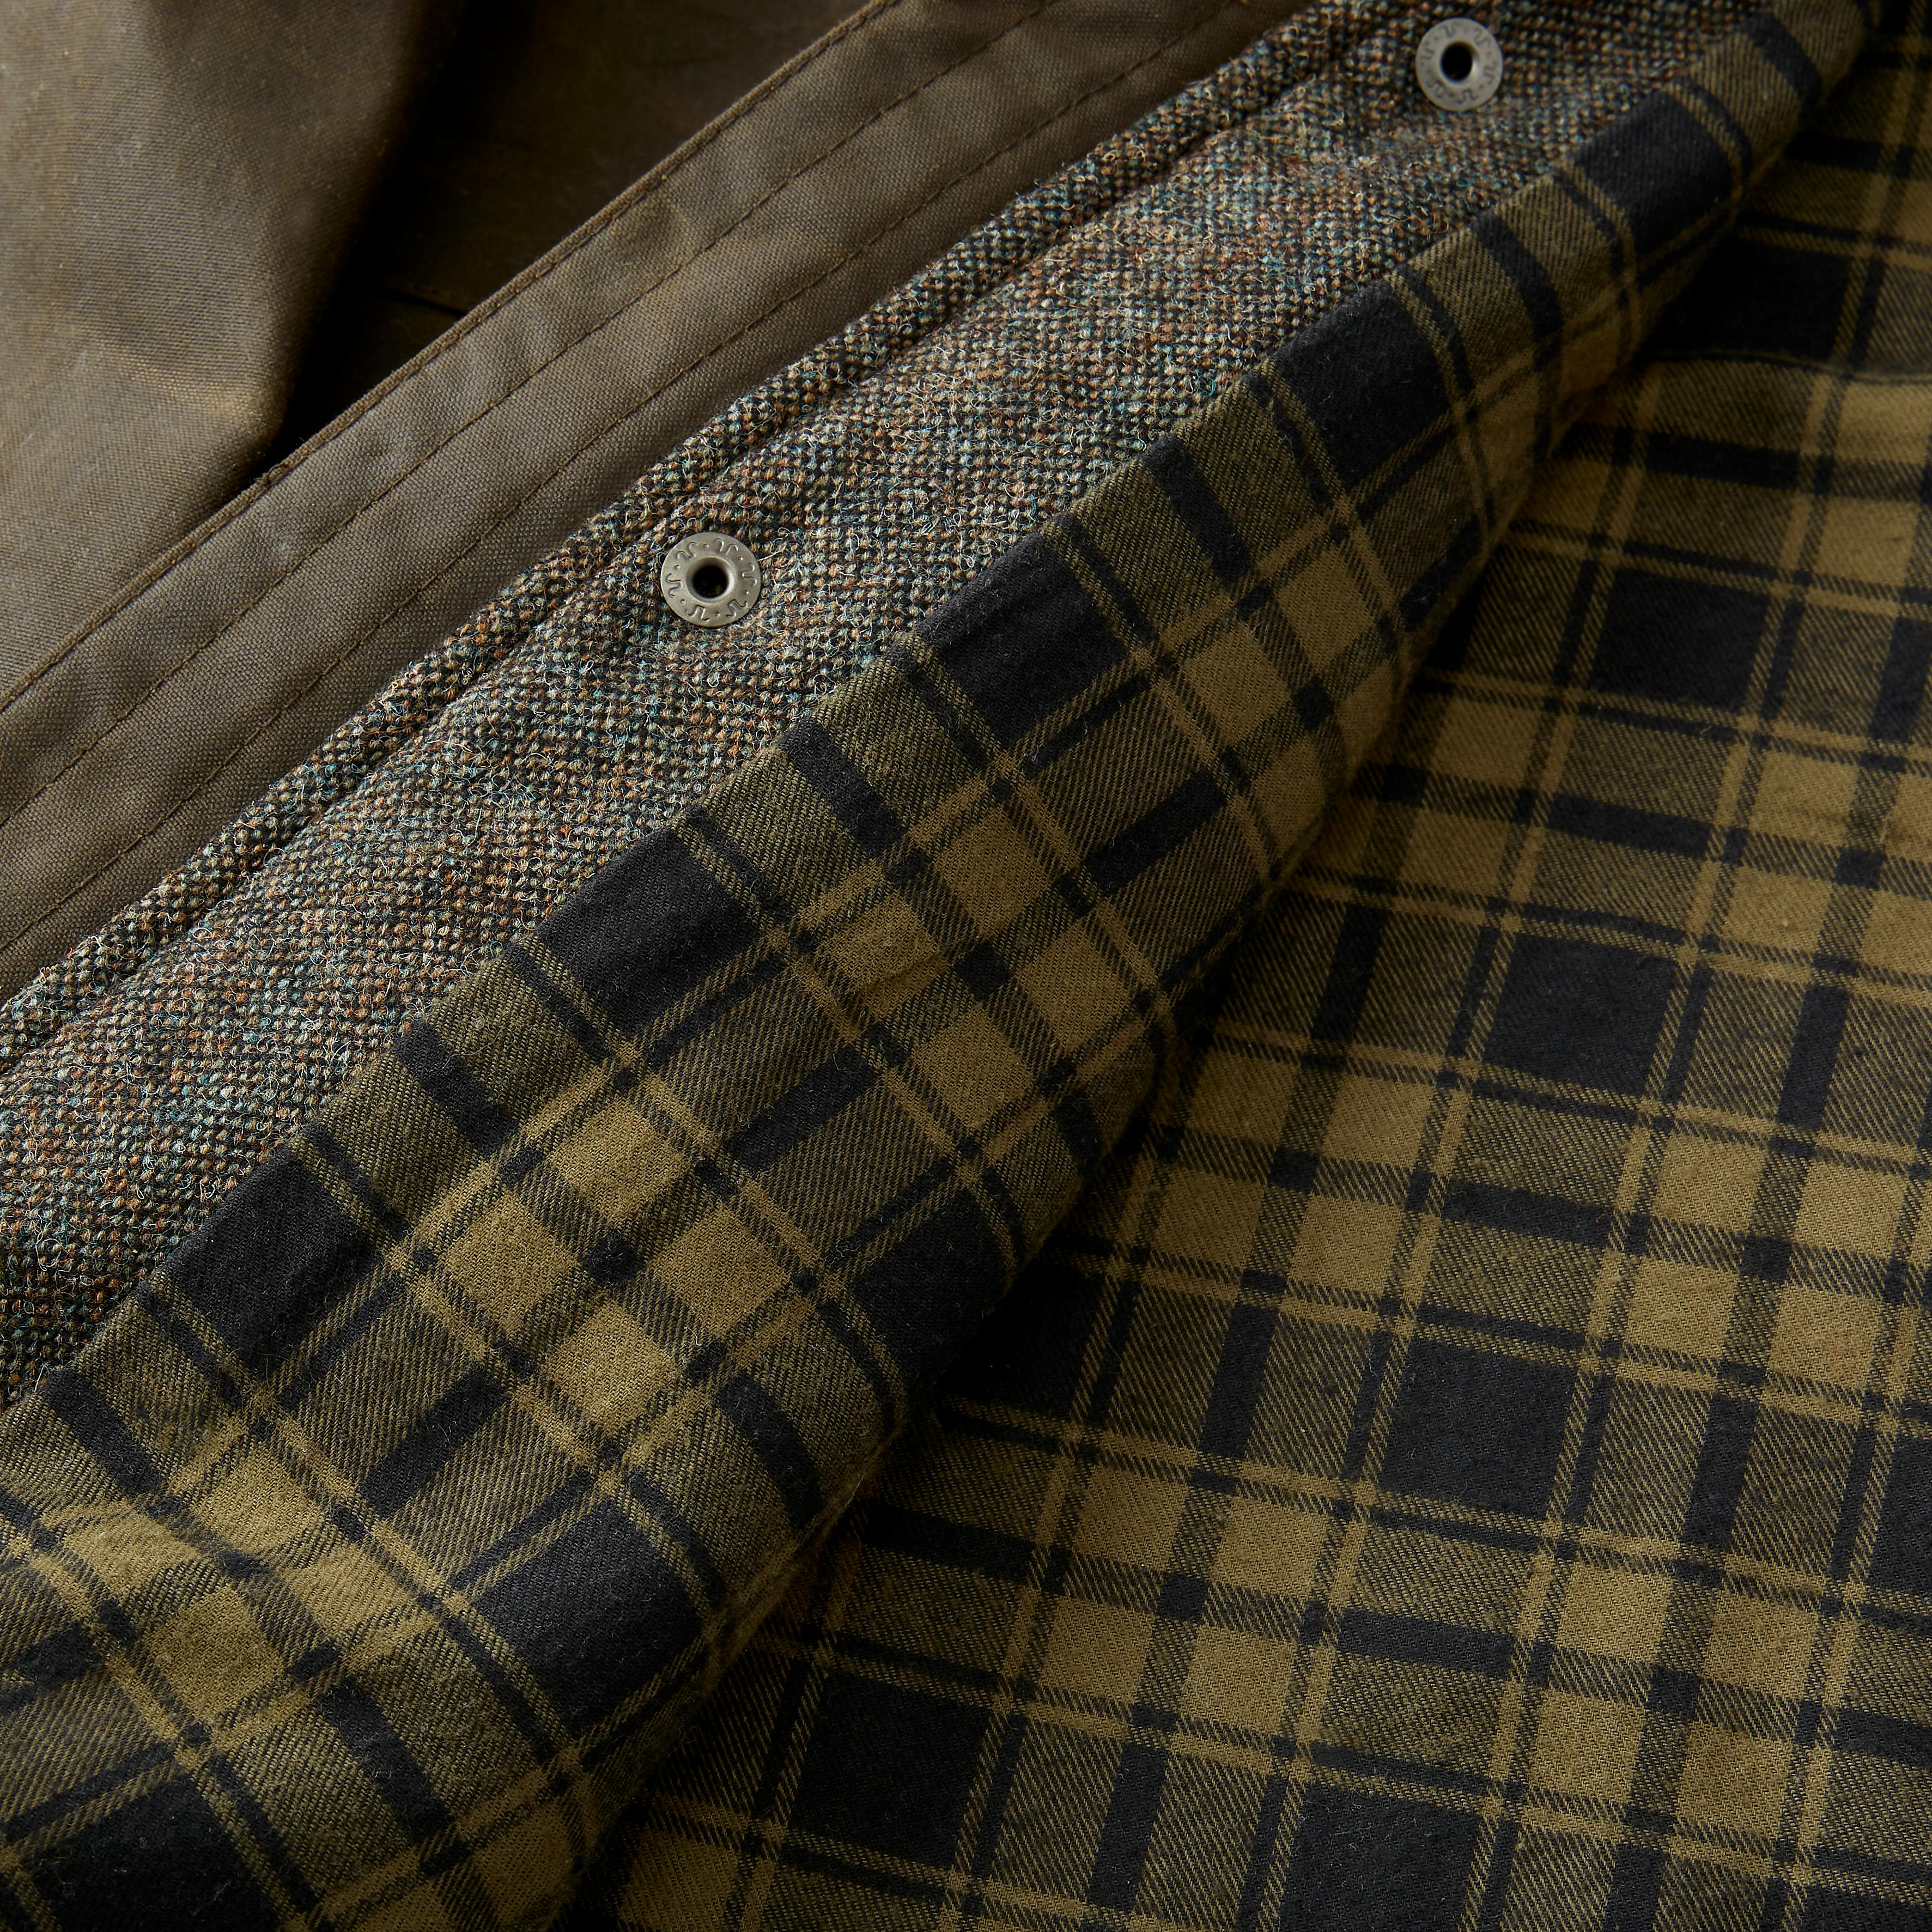 Flint and Tinder Flannel-lined Waxed Hudson Jacket